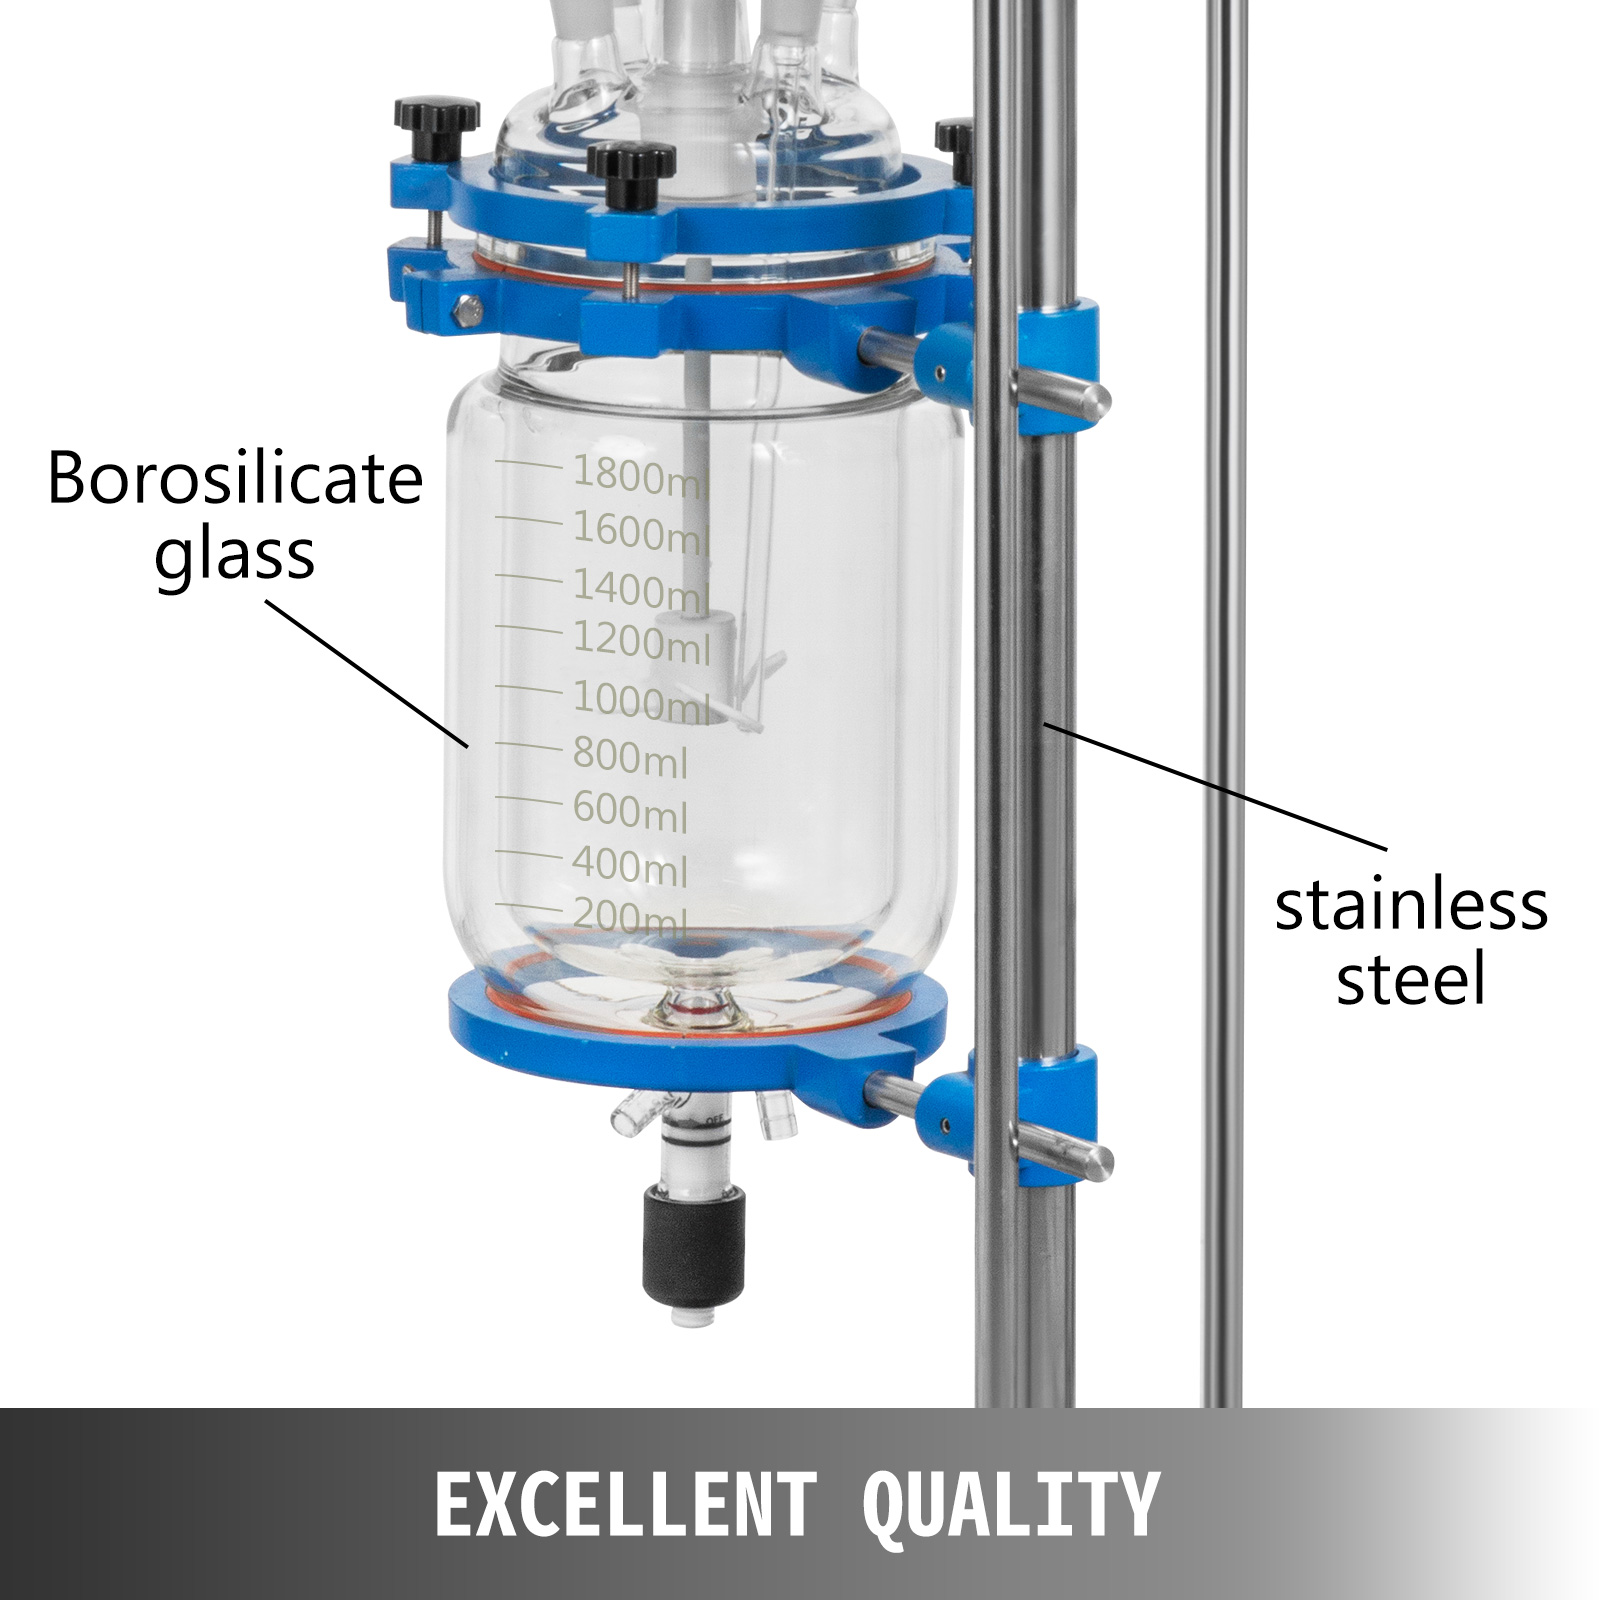 jacketed reactor, 2L, 5L